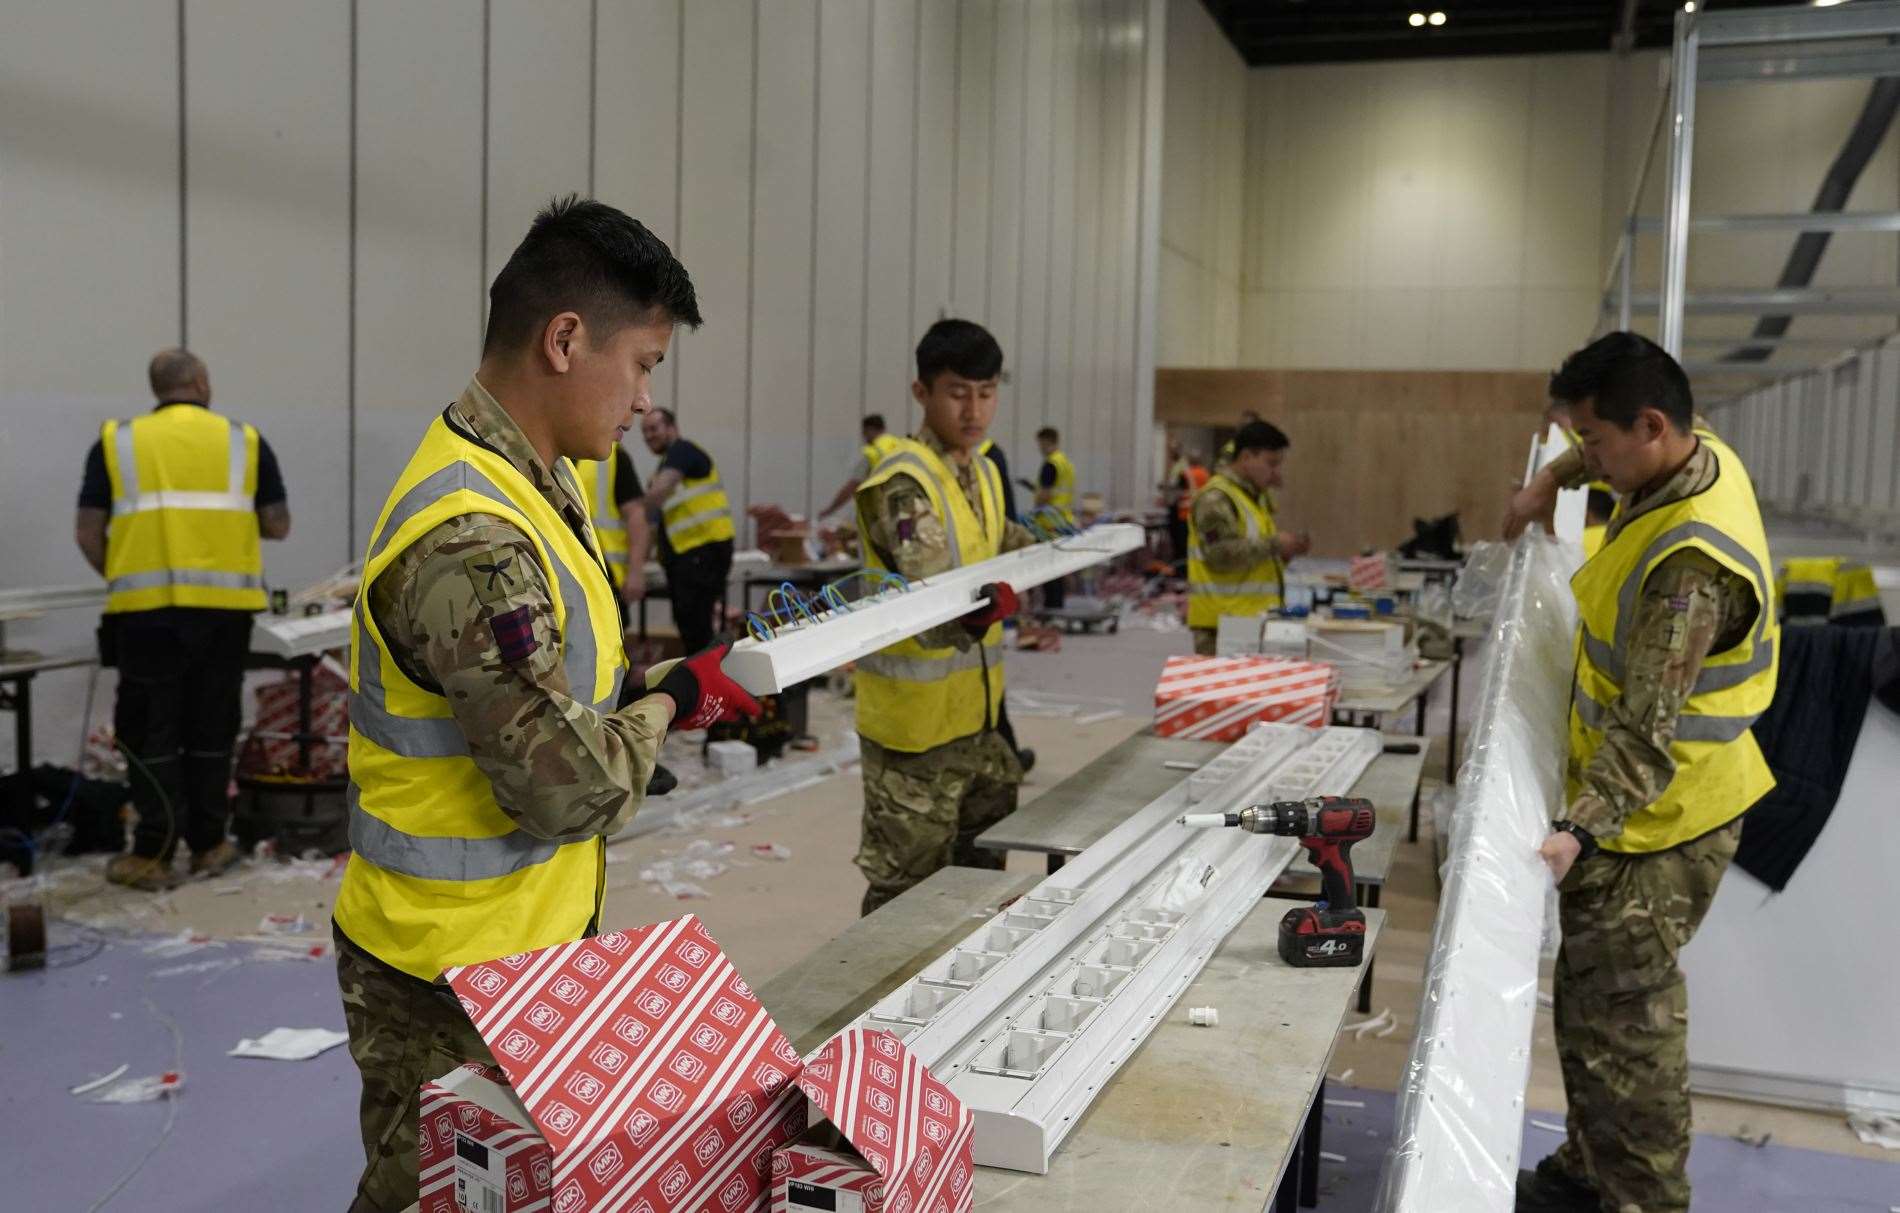 Members of the Queen’s Gurkha Engineer Regiment, 36 Engineer Regiment as they help build NHS Nightingale Hospital. Picture: Andrew Parsons / 10 Downing Street